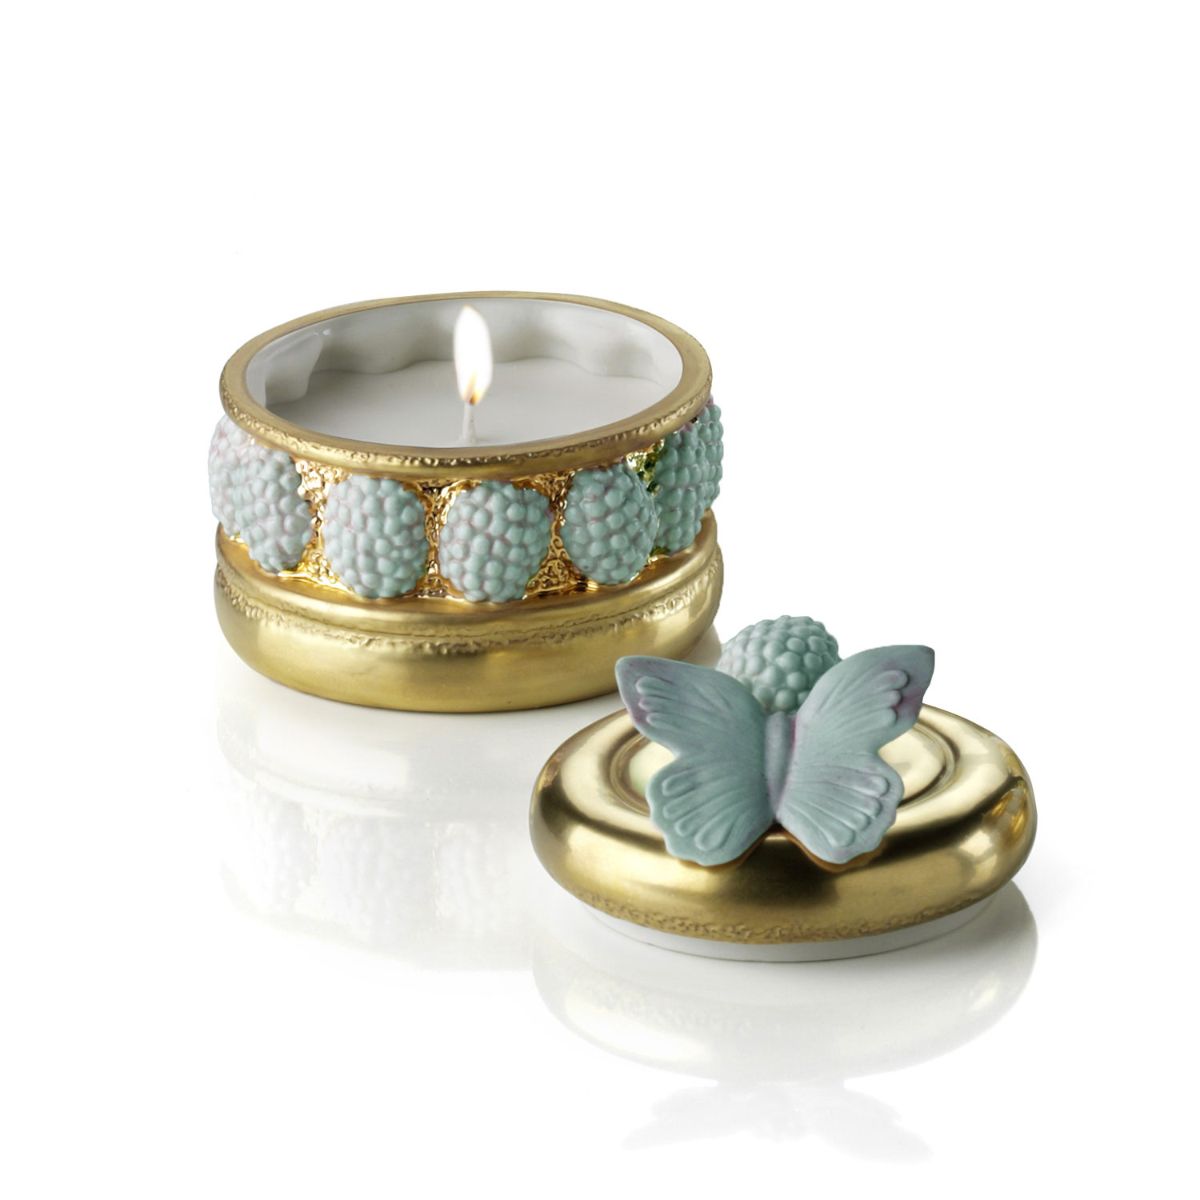 Chantilly Ispahan Pia Cake Scented Candle - Gold & Blue